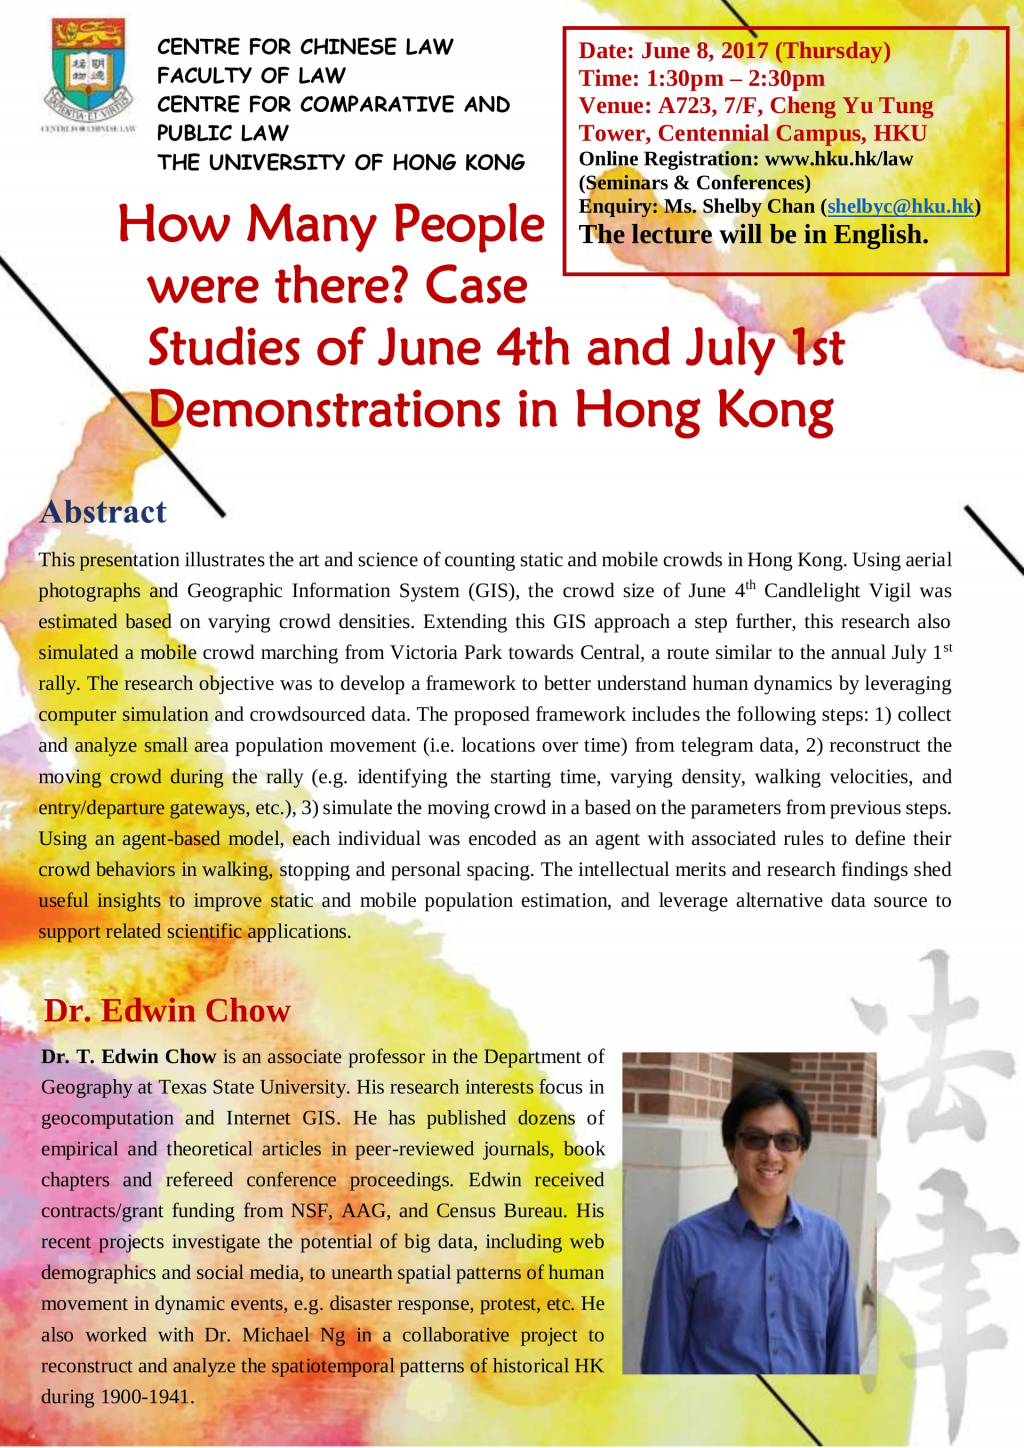 How Many People were there? Case Studies of June 4th and July 1st Demonstrations in Hong Kong